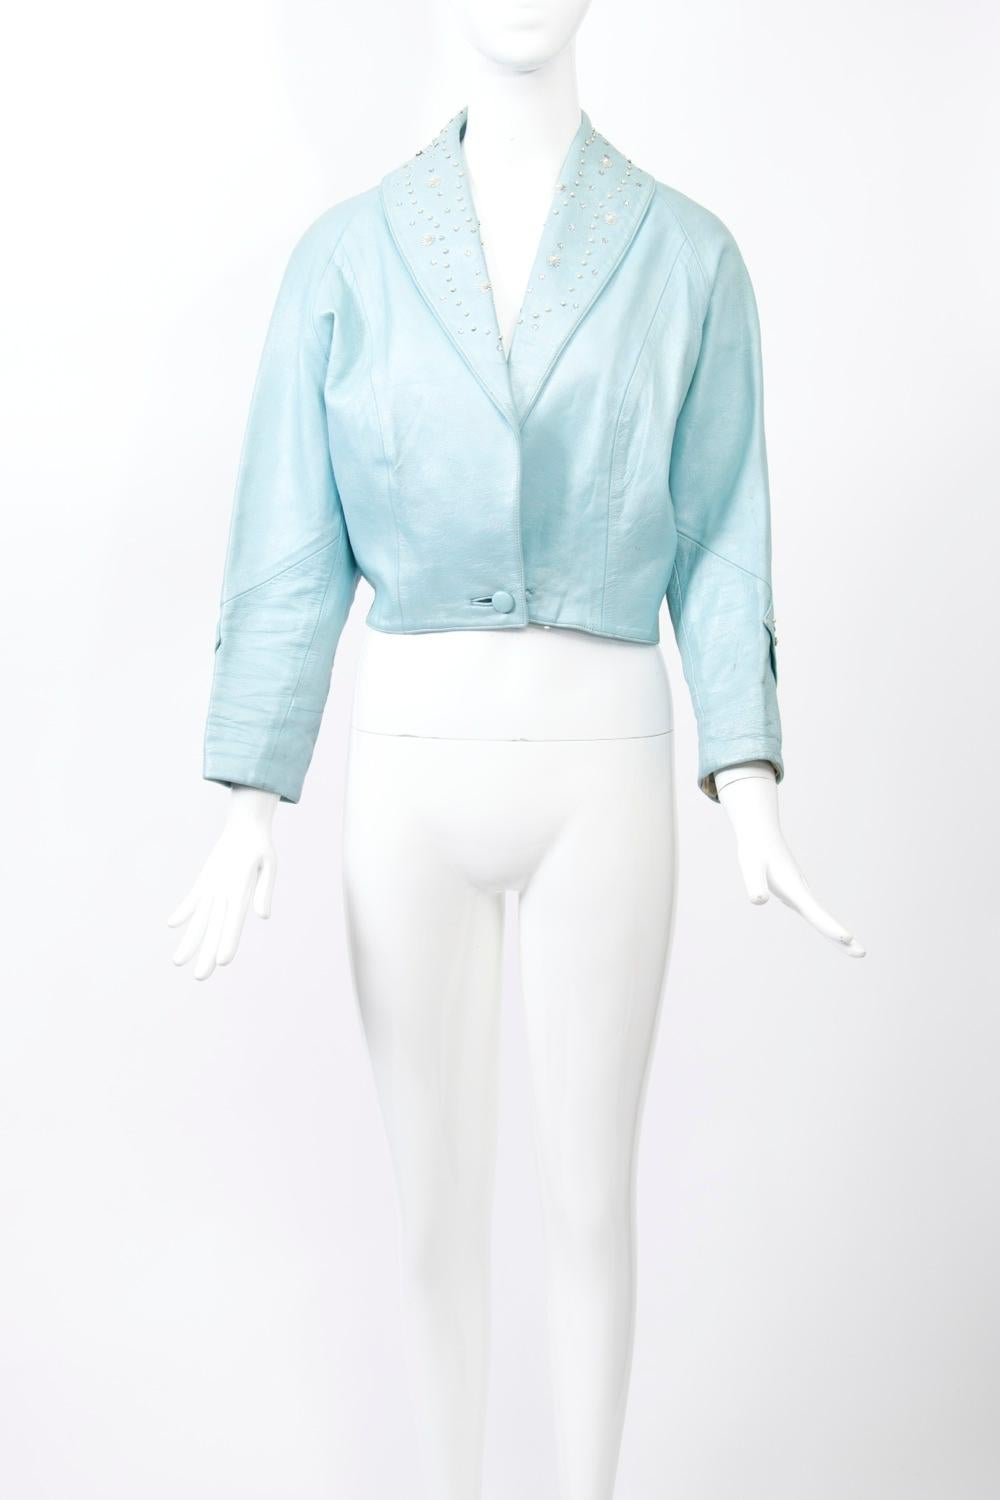 1950s waist-length jacket in pearlized blue leather, its shawl collar studded with pearls and rhinestones, as is a strip below the elbow on the raglan sleeves. Single button at the waist. Curved, longer back with slight slits at sides.